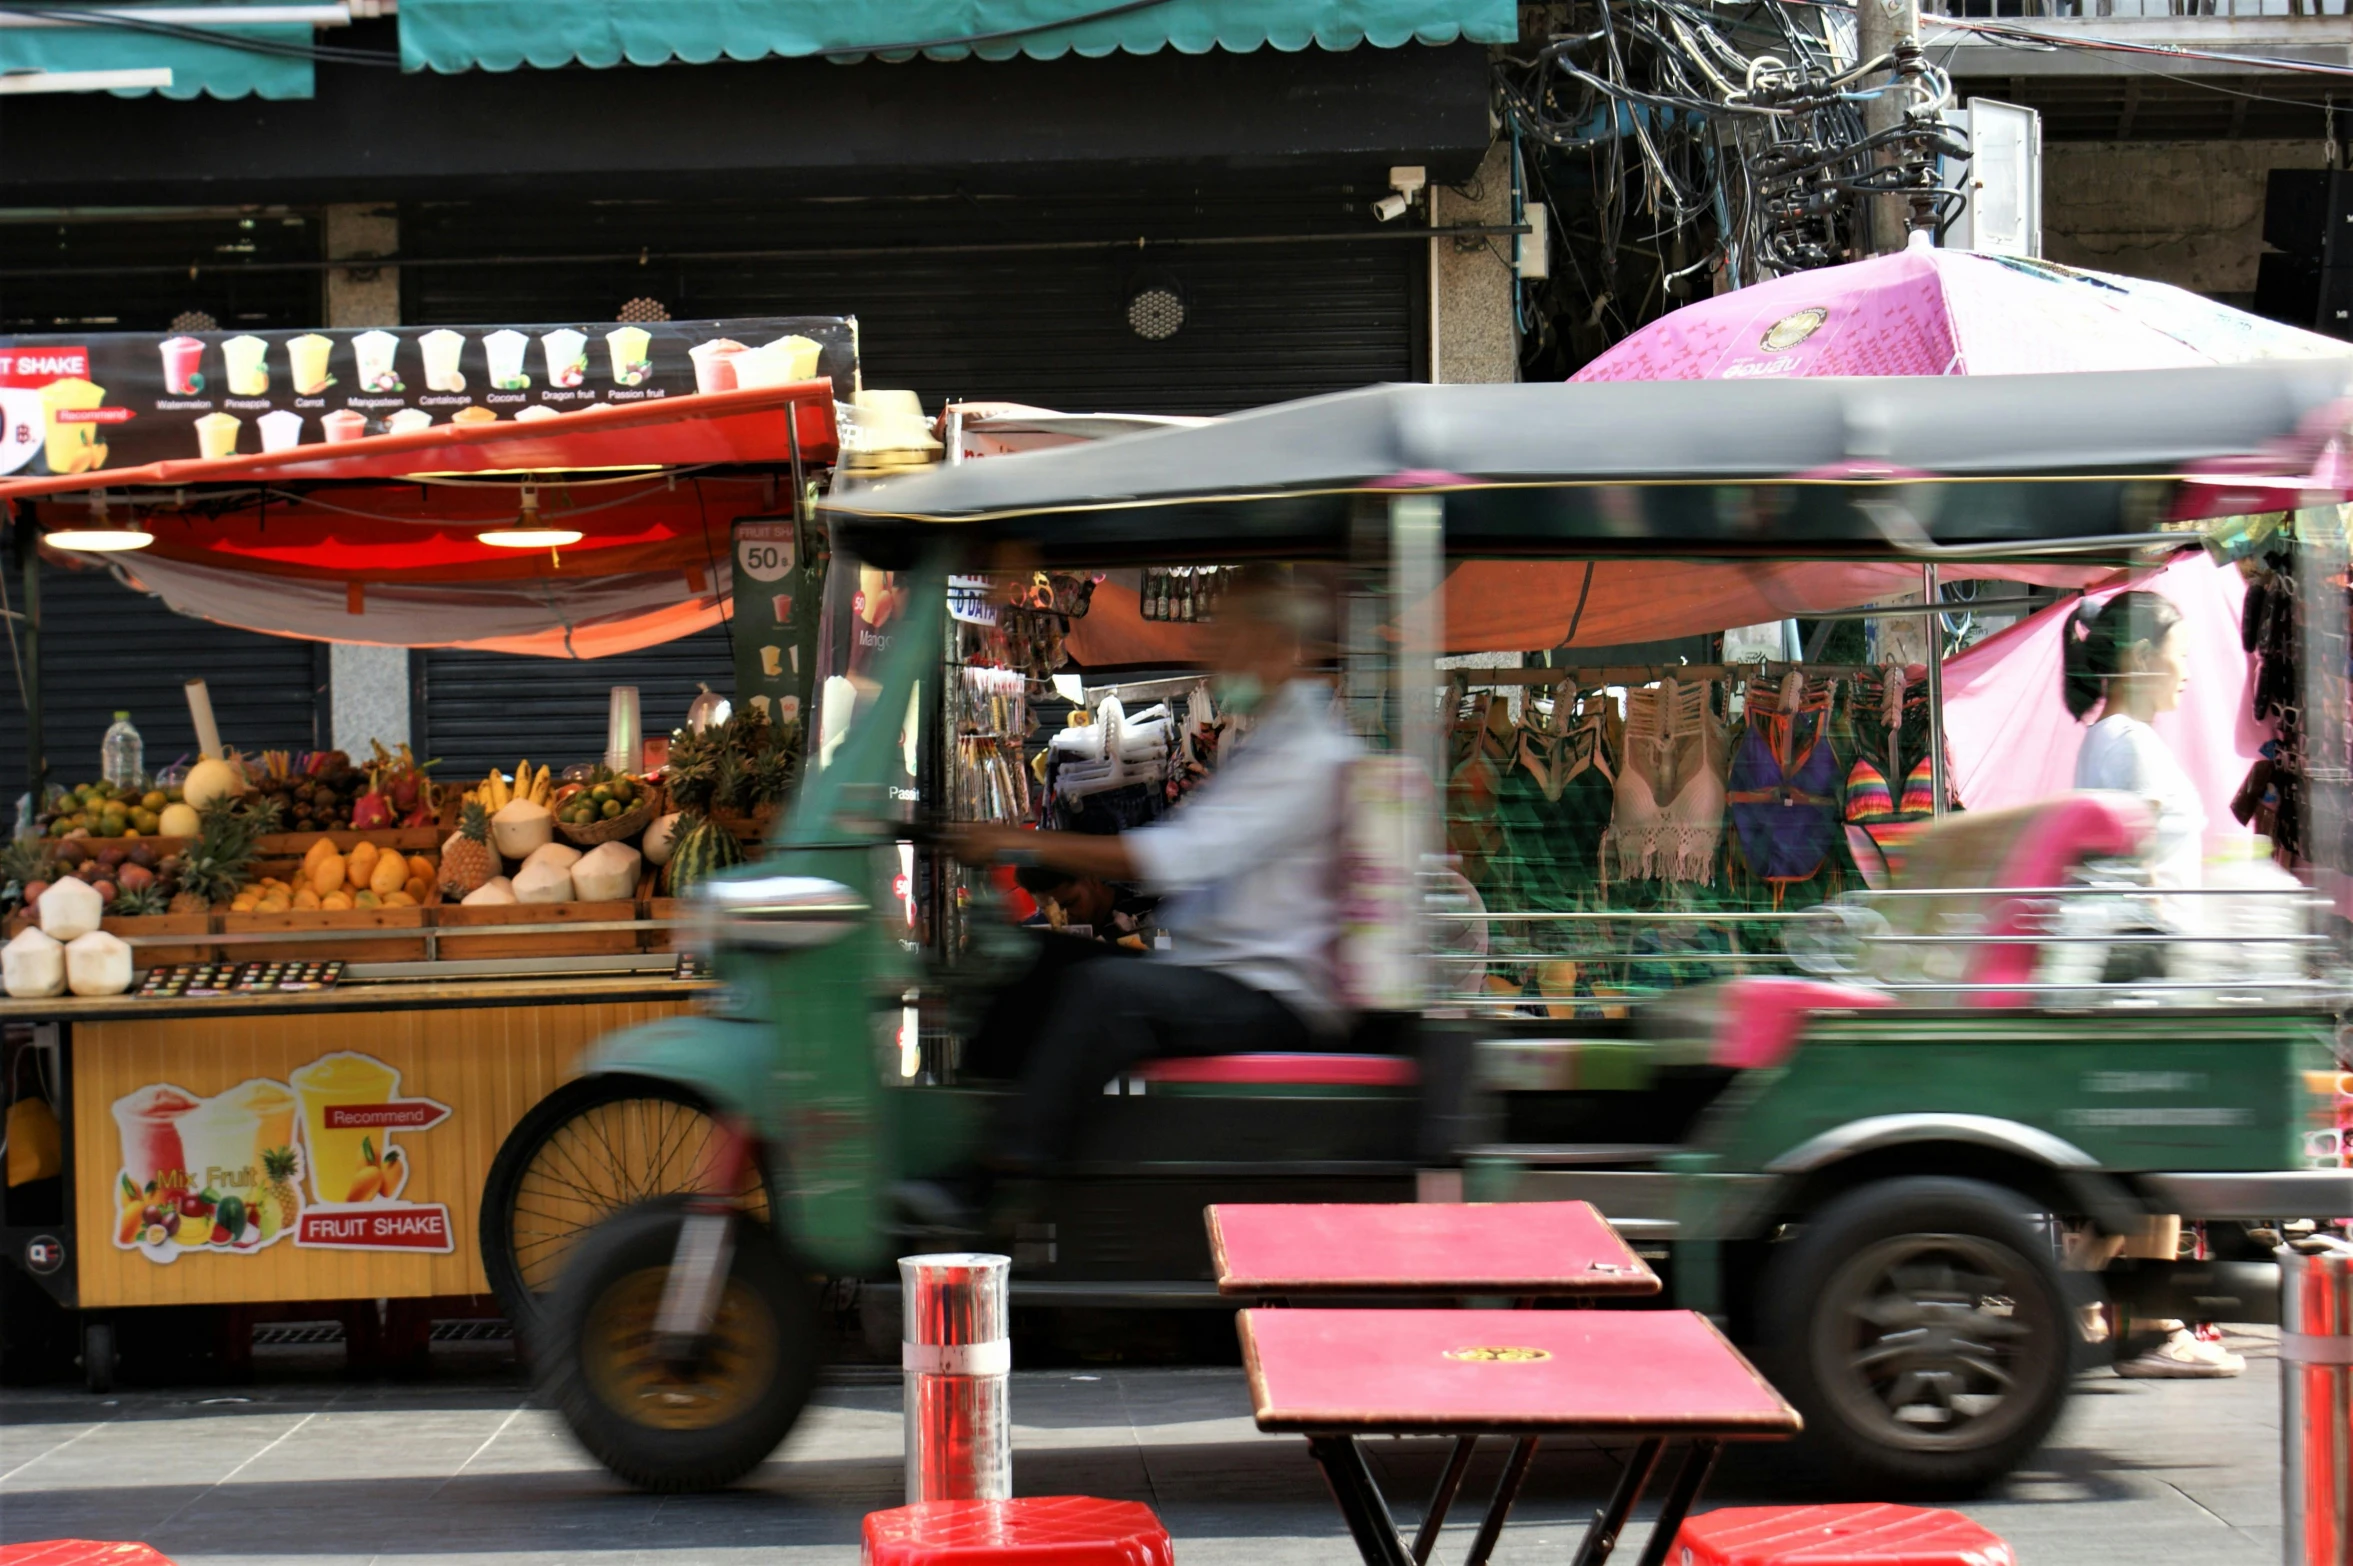 people ride in an ice cream cart on a busy street